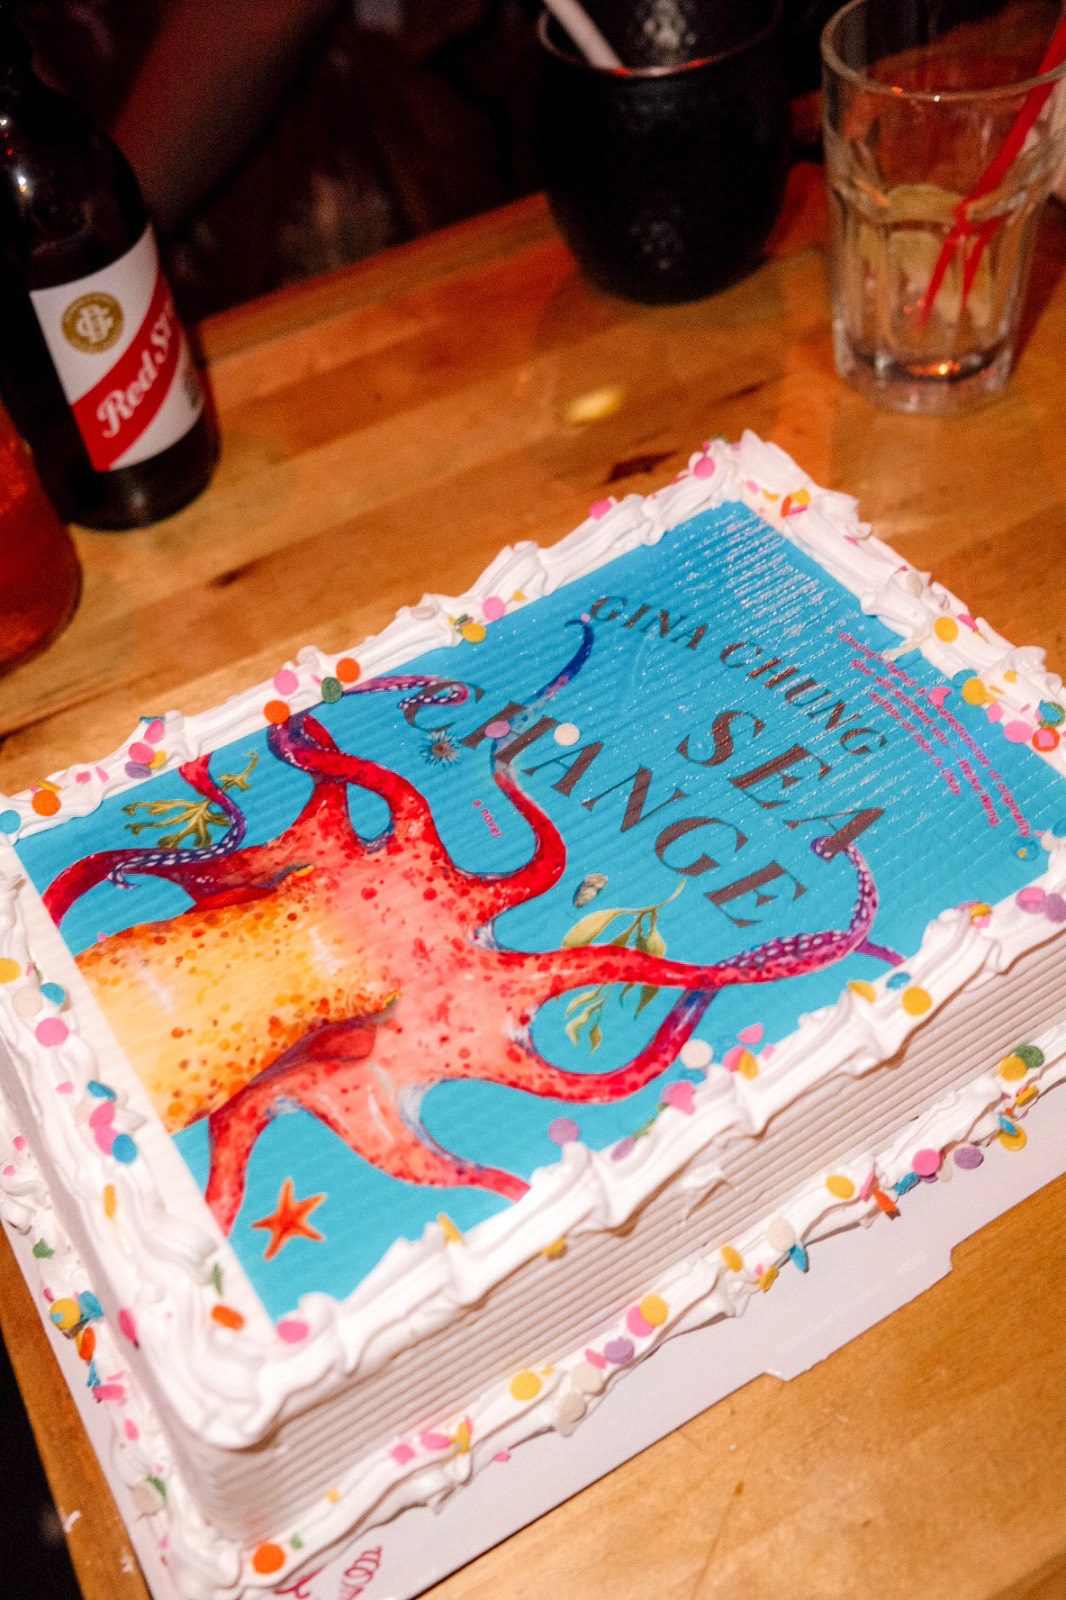 A sheet of Carvel ice cream cake decorated with the cover of Gina Chung’s book Sea Change. The cover features a large pink octopus with its tentacles outstretched in front of a turquoise background. Chung’s name and the book’s title are above it. The cake is piped around the edges with white frosting and dotted with colorful, round sprinkles.